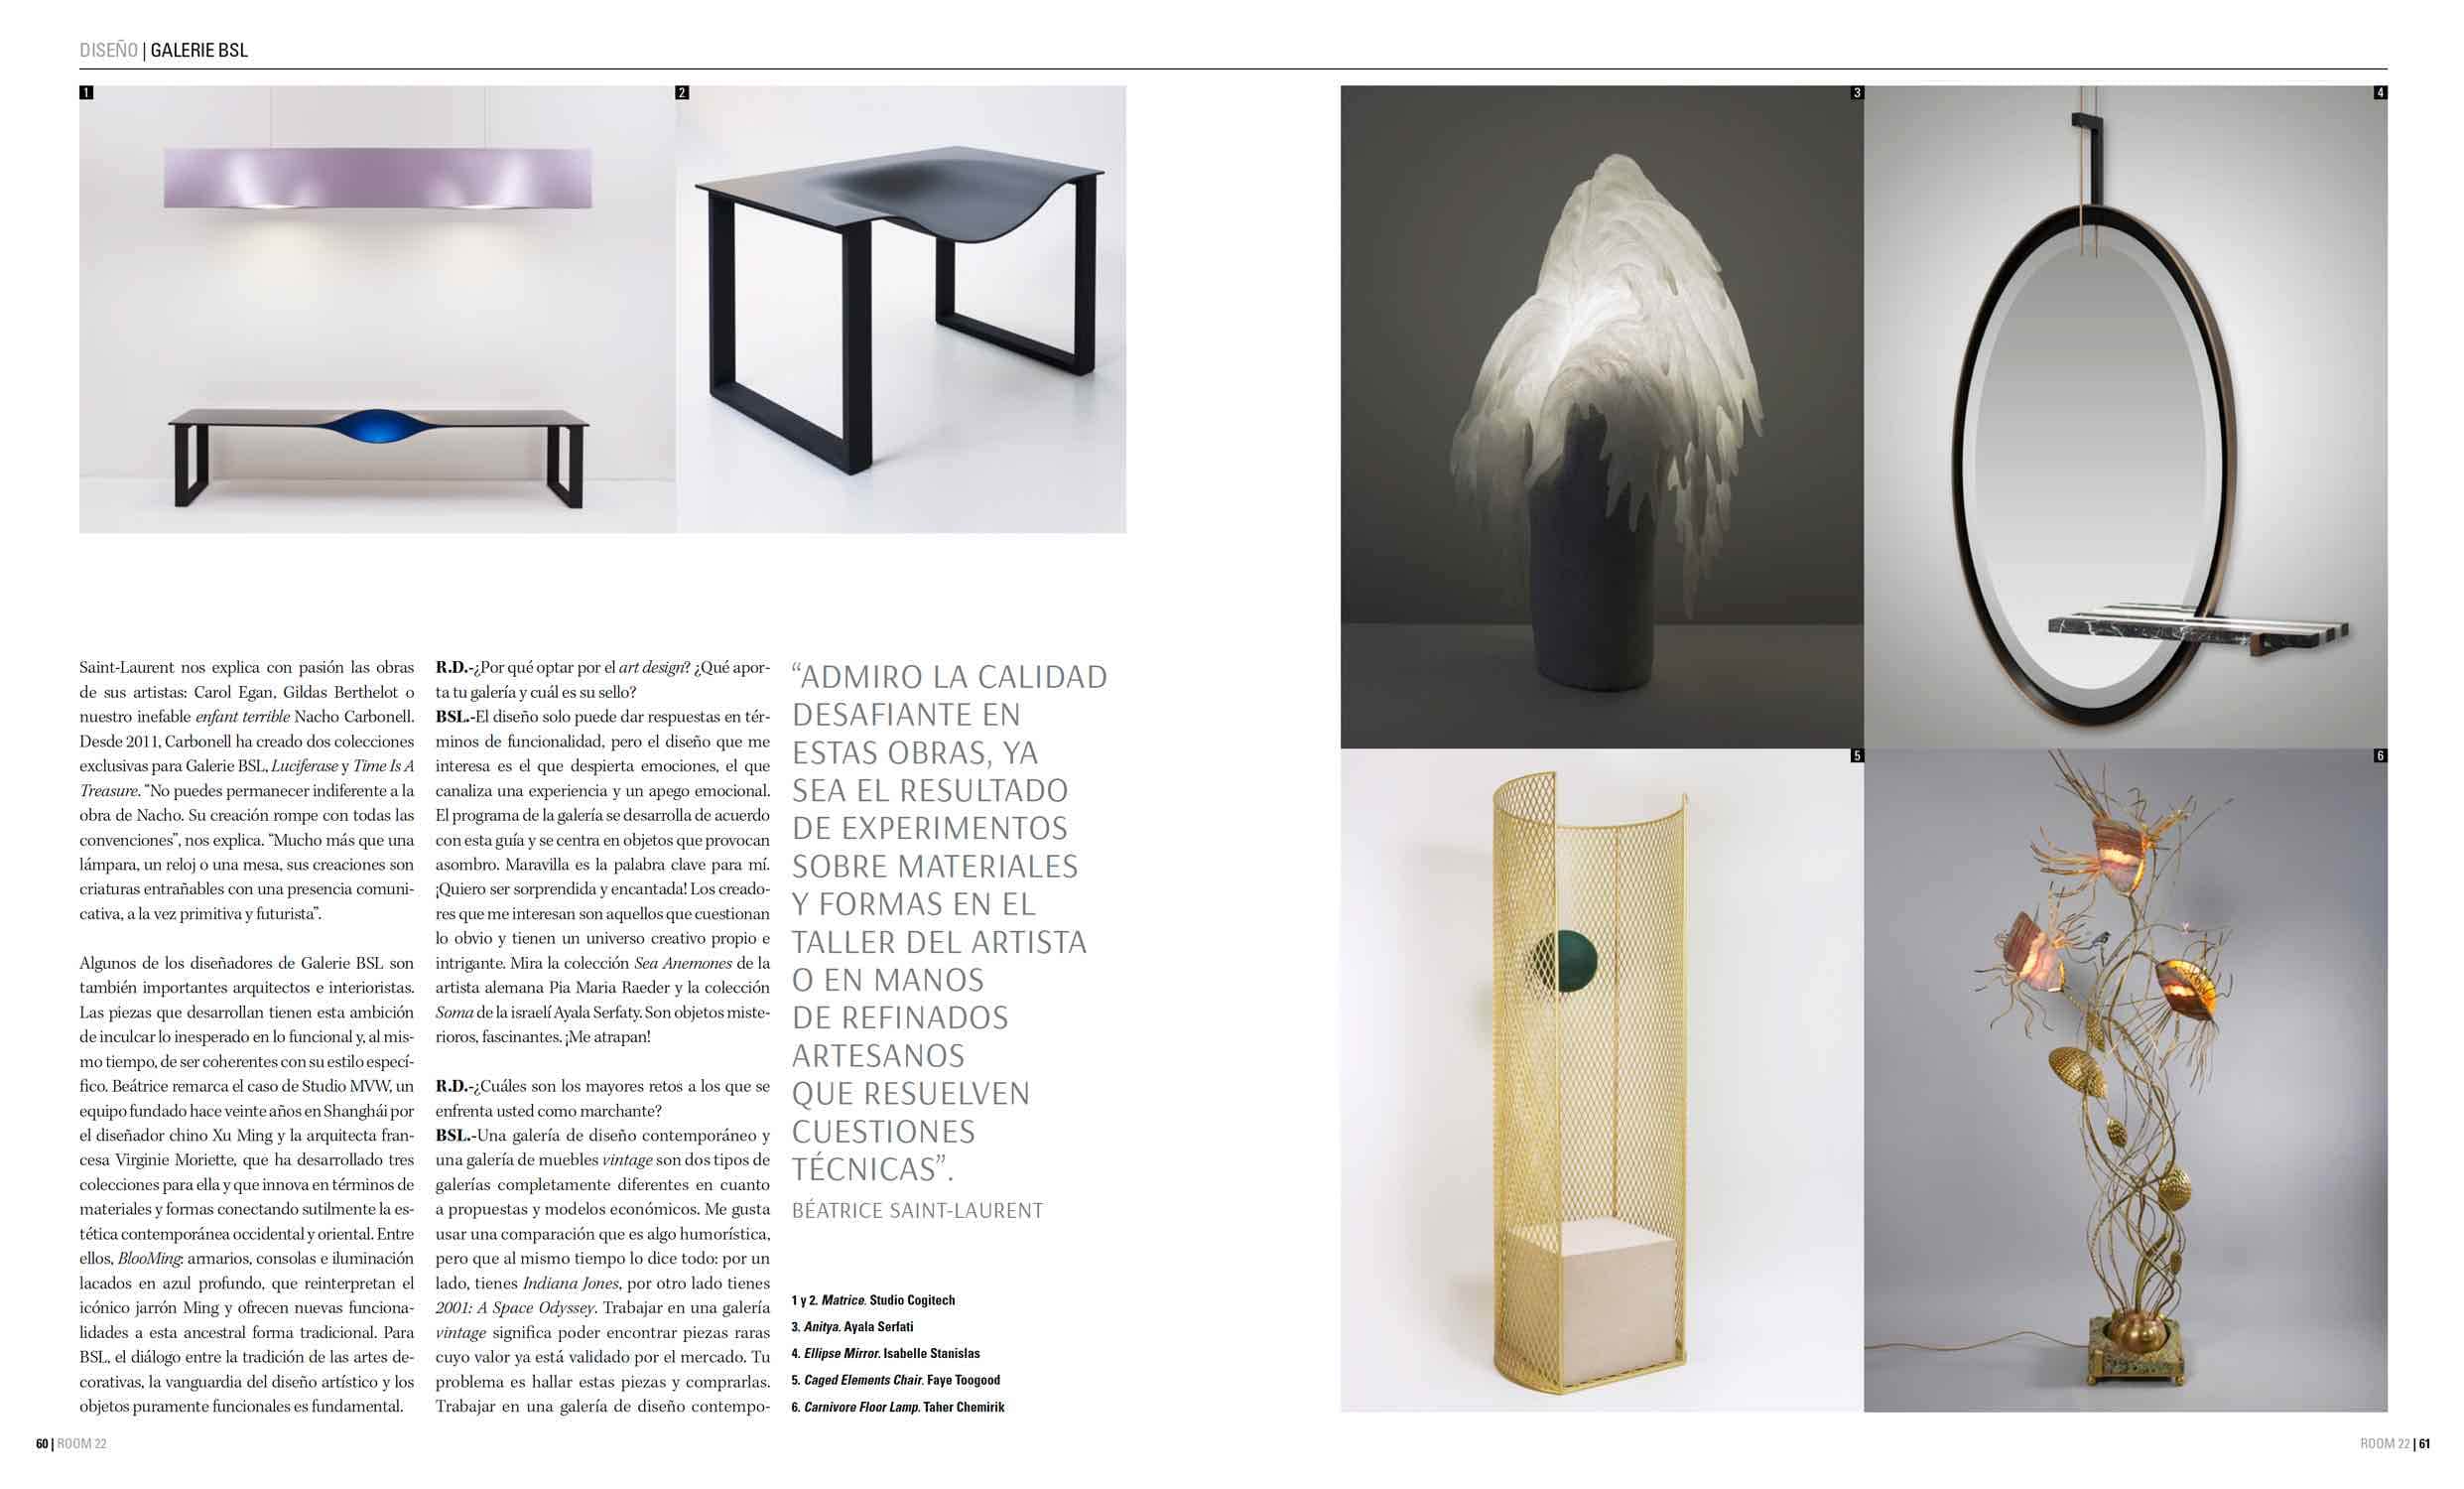 Room #22 published on February 2020 featuring an article on Galerie BSL with CE15 Ombre Chair by Carol Egan, page 62.